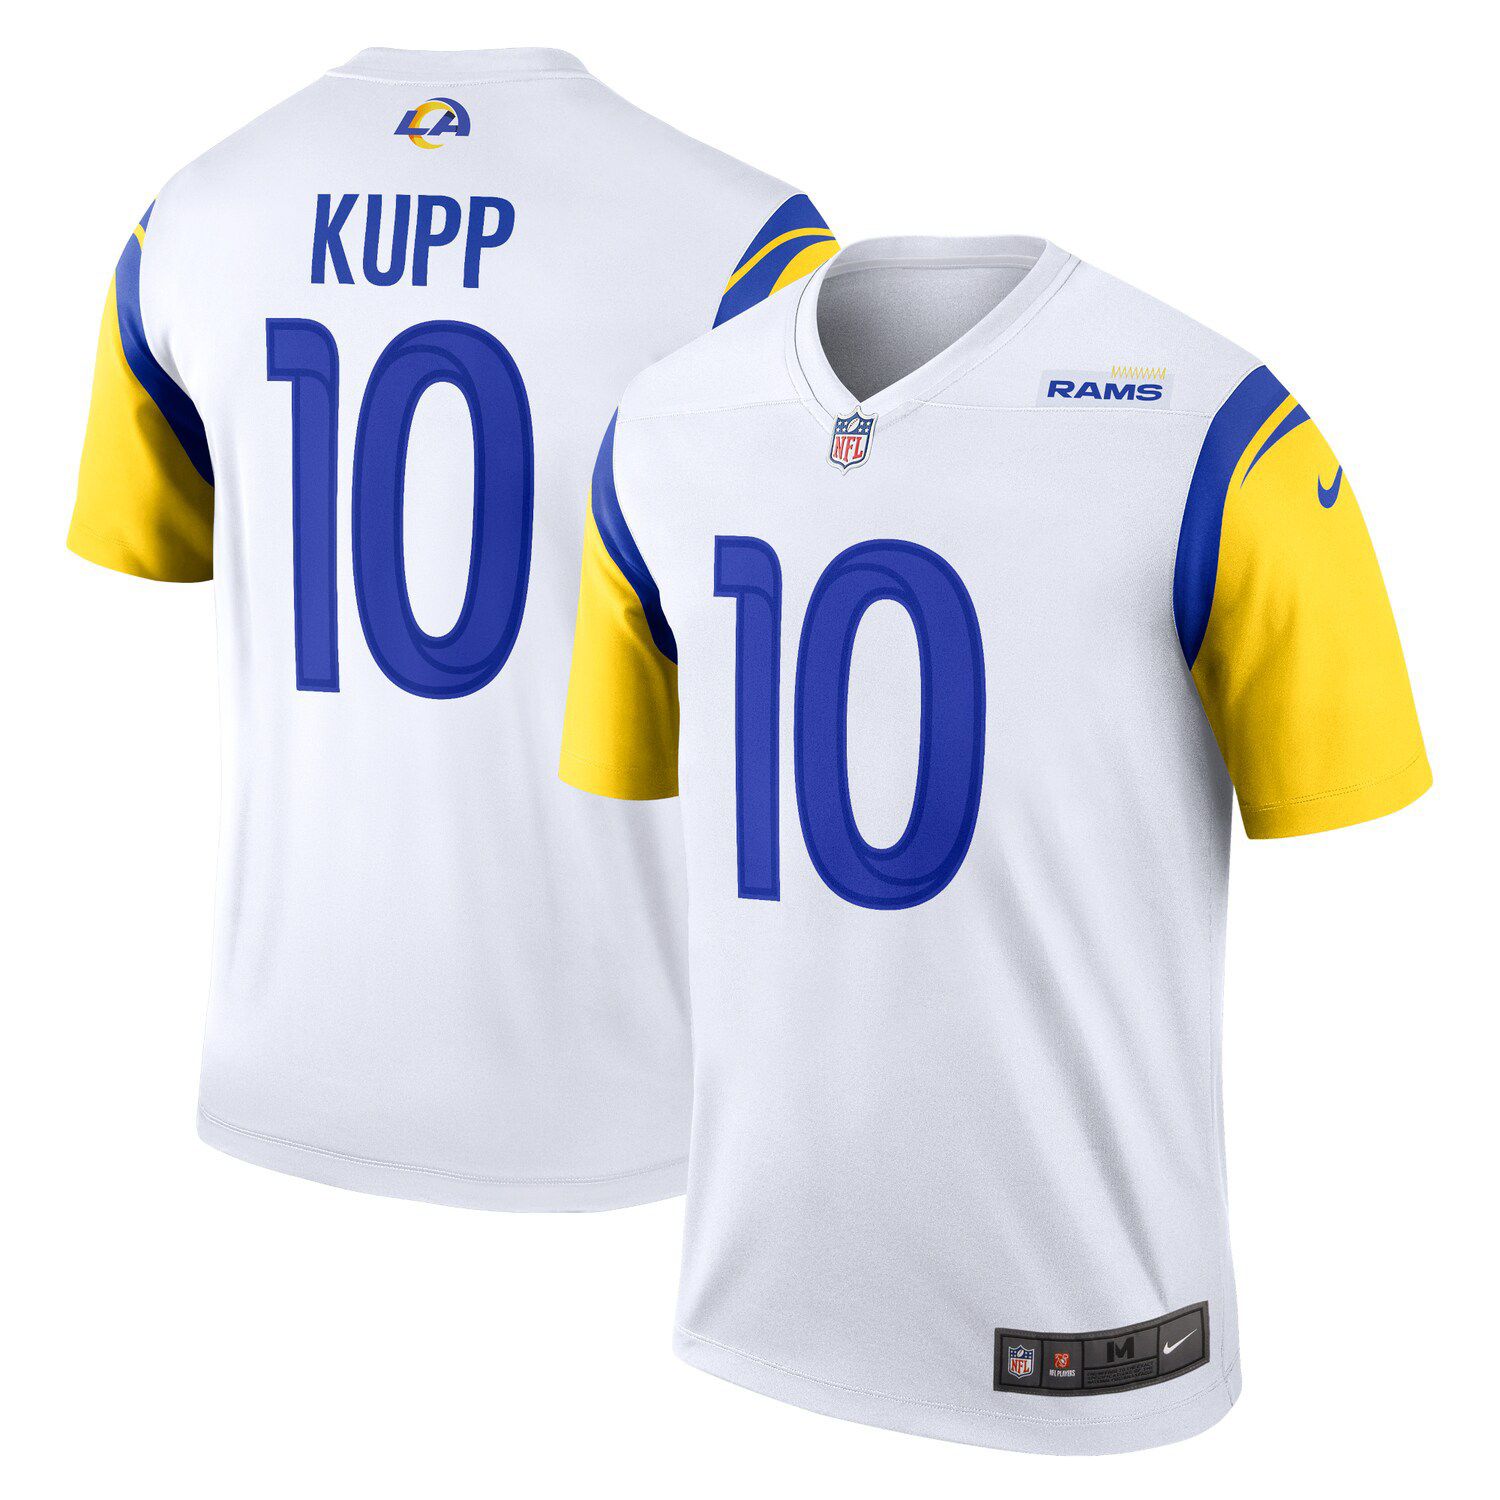 Outerstuff Youth Cooper Kupp Royal Los Angeles Rams Replica Player Jersey